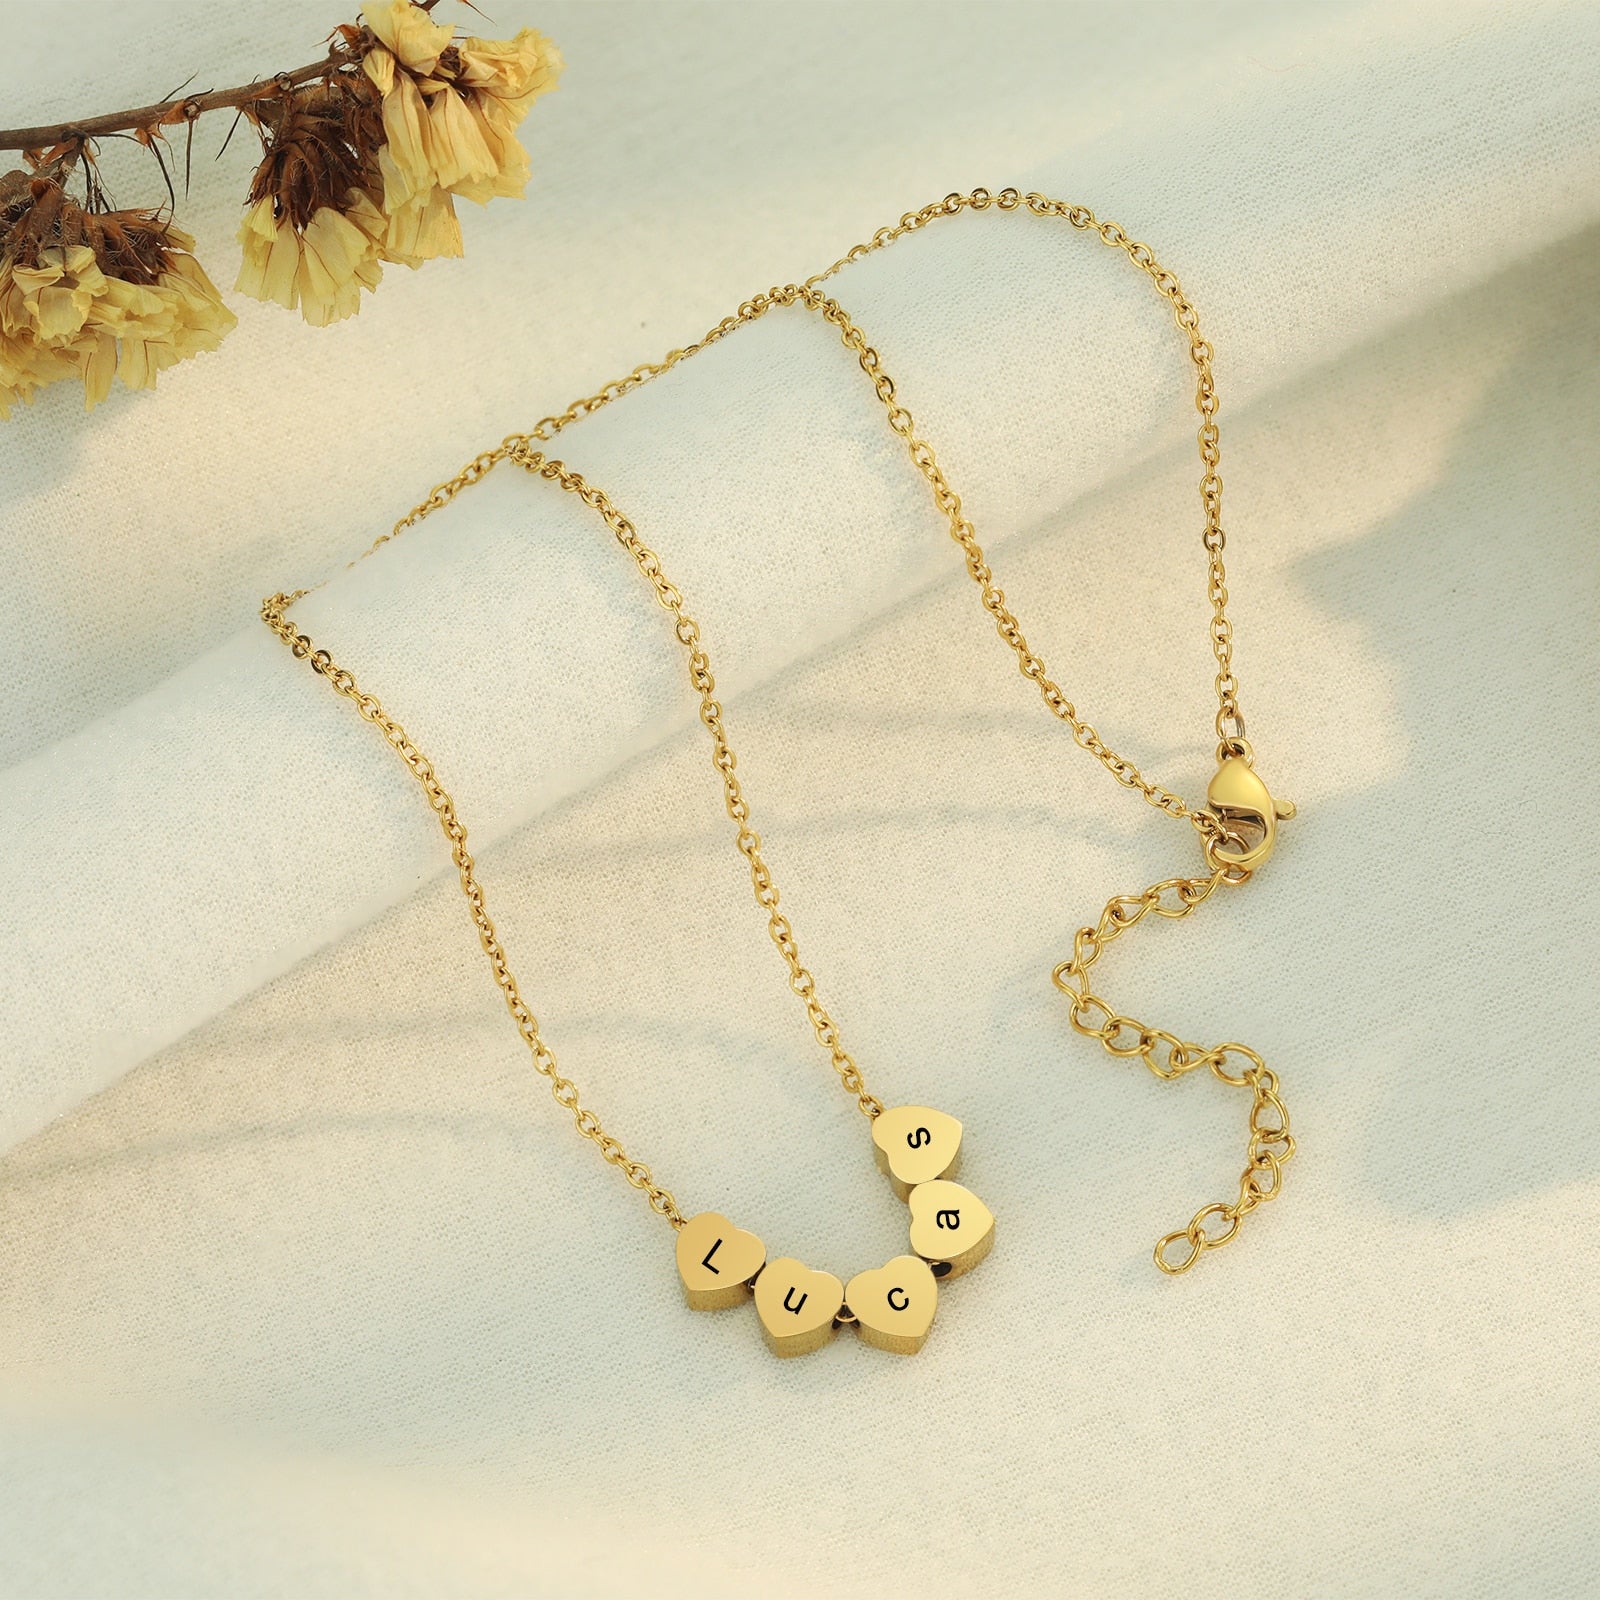 Personalized Initial Letter Pendant Necklace